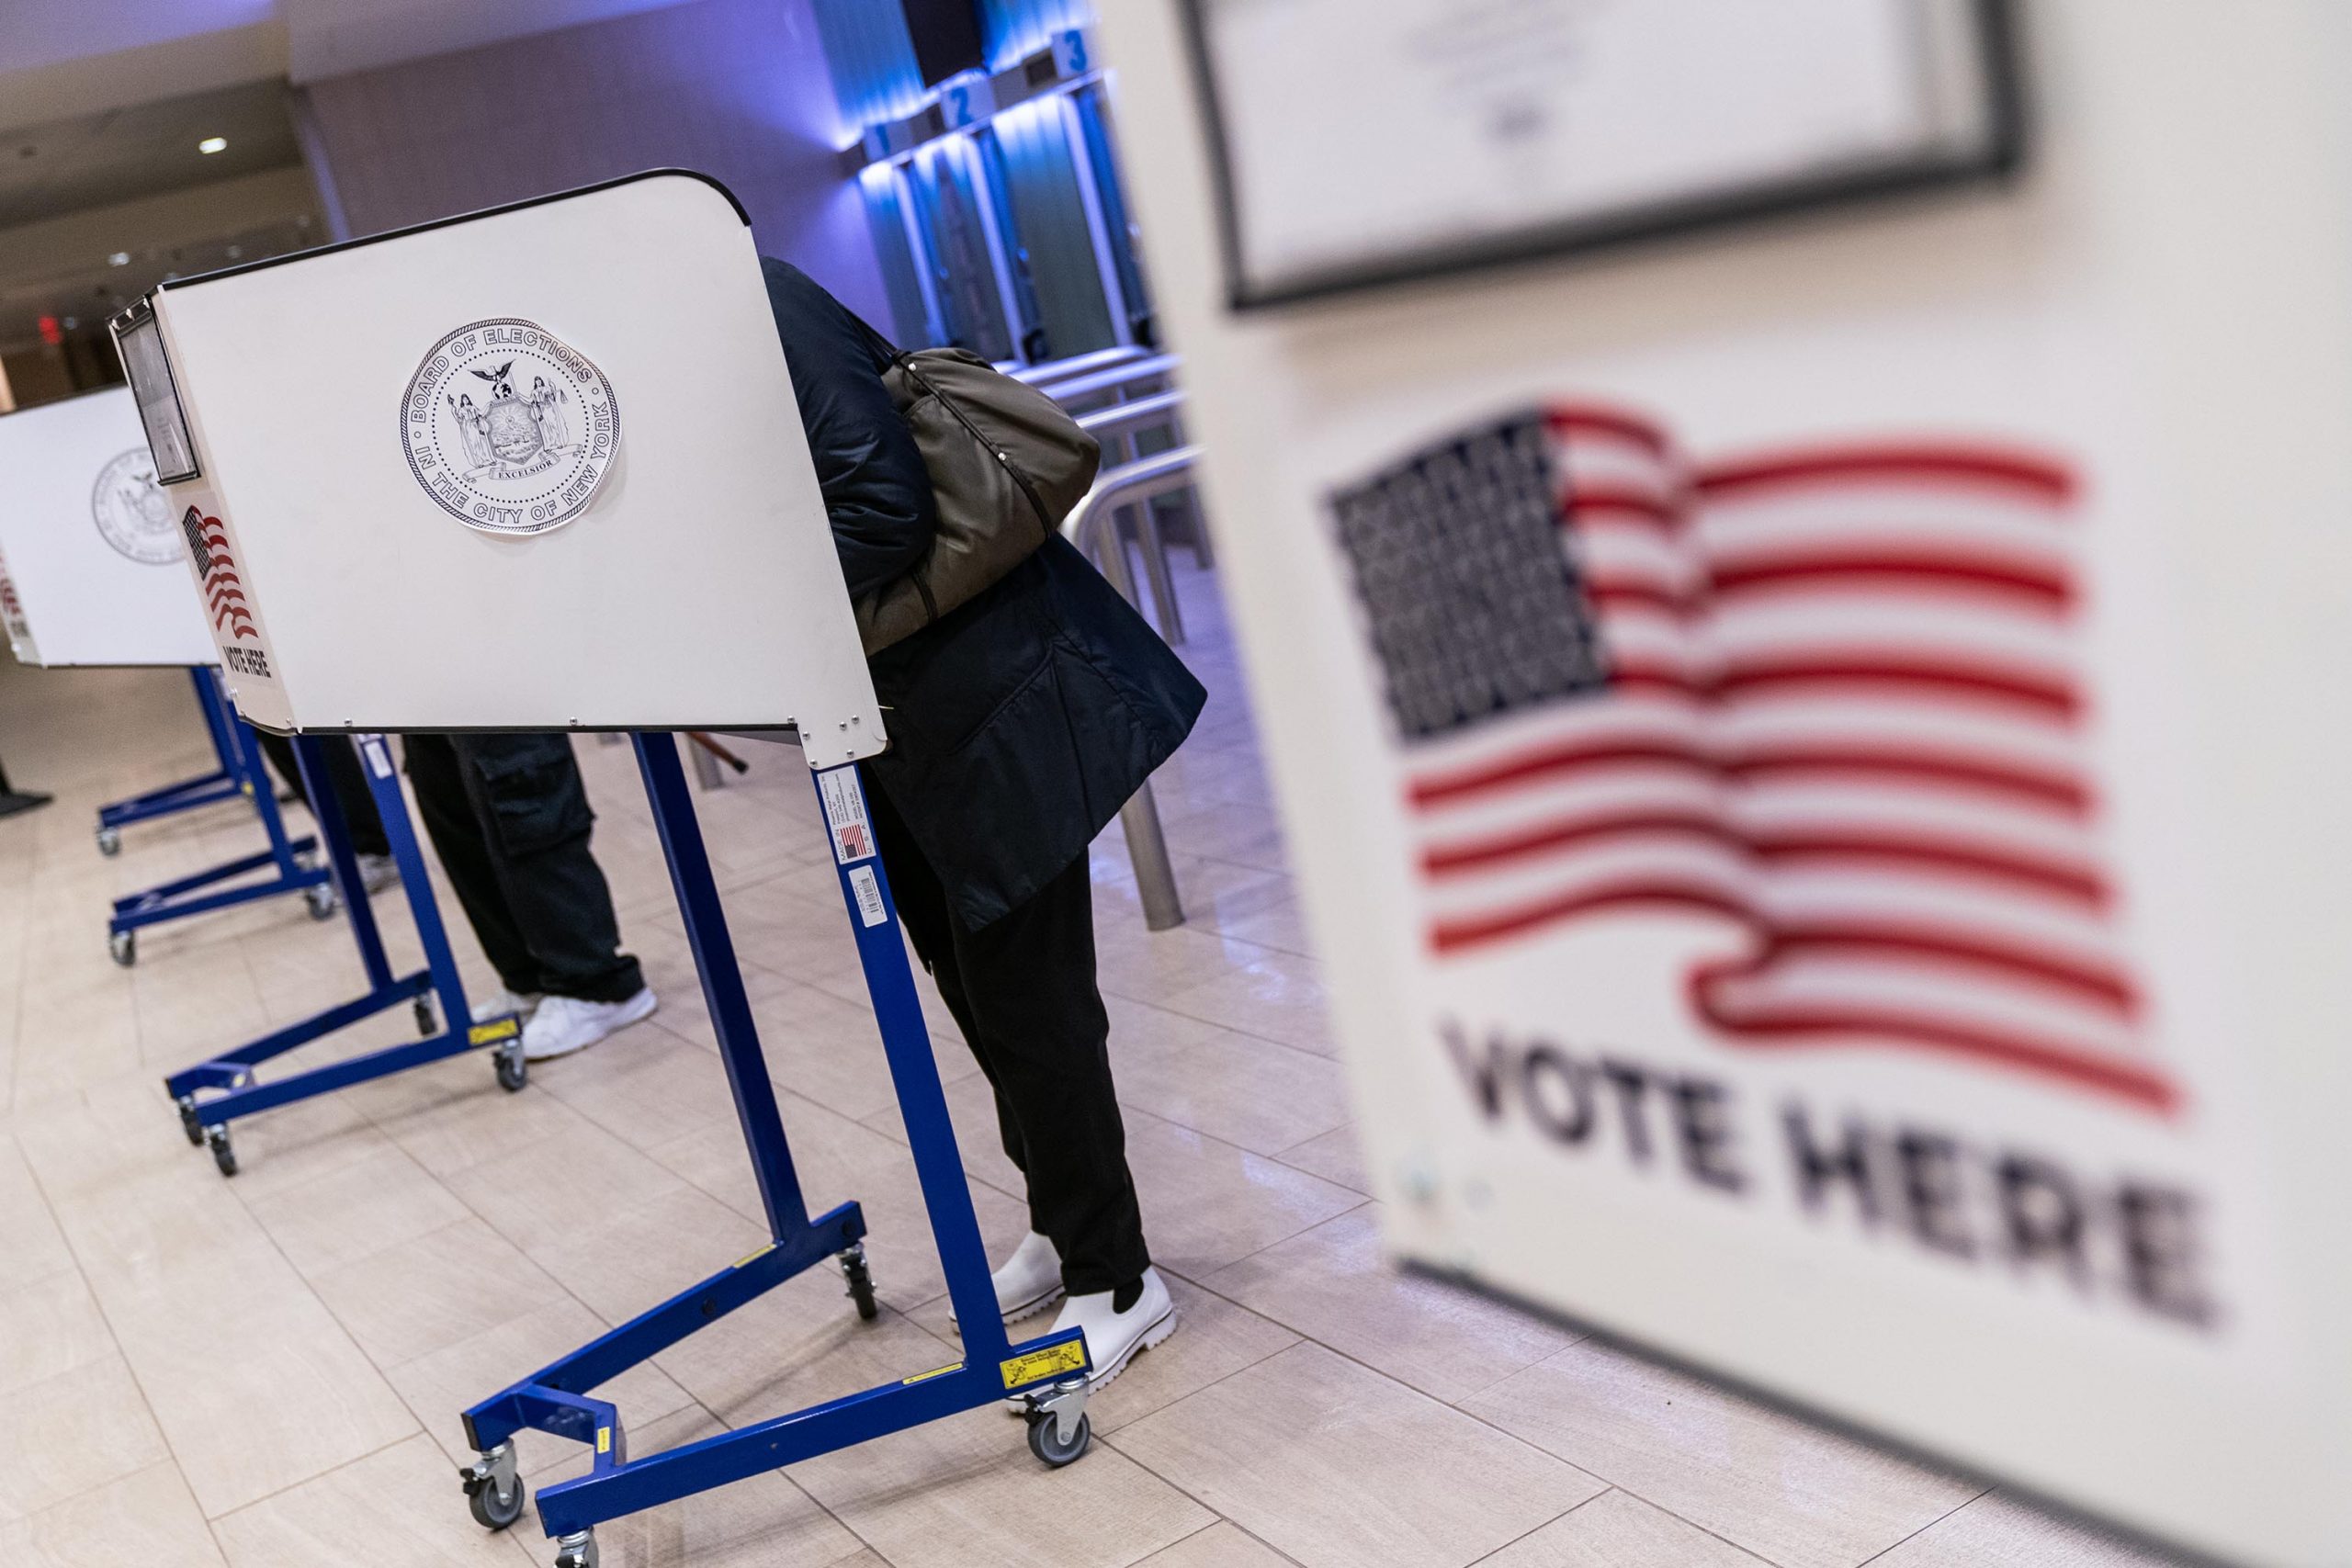 Voters cast ballots at an early voting polling location for the 2020 Presidential election at Madis...